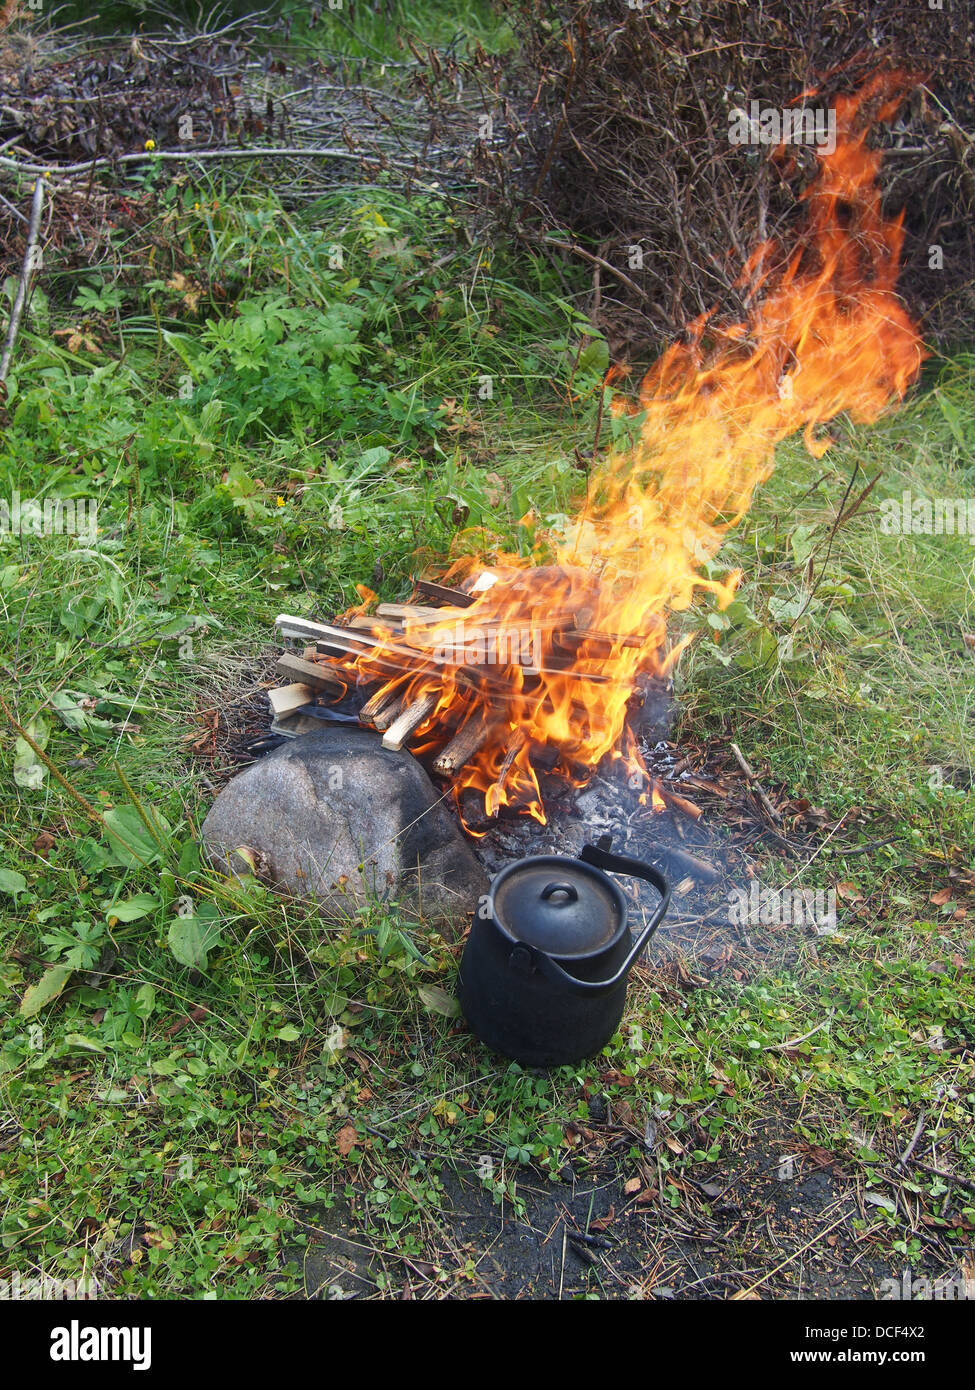 https://c8.alamy.com/comp/DCF4X2/teapot-and-kettle-on-a-fire-in-the-summer-DCF4X2.jpg